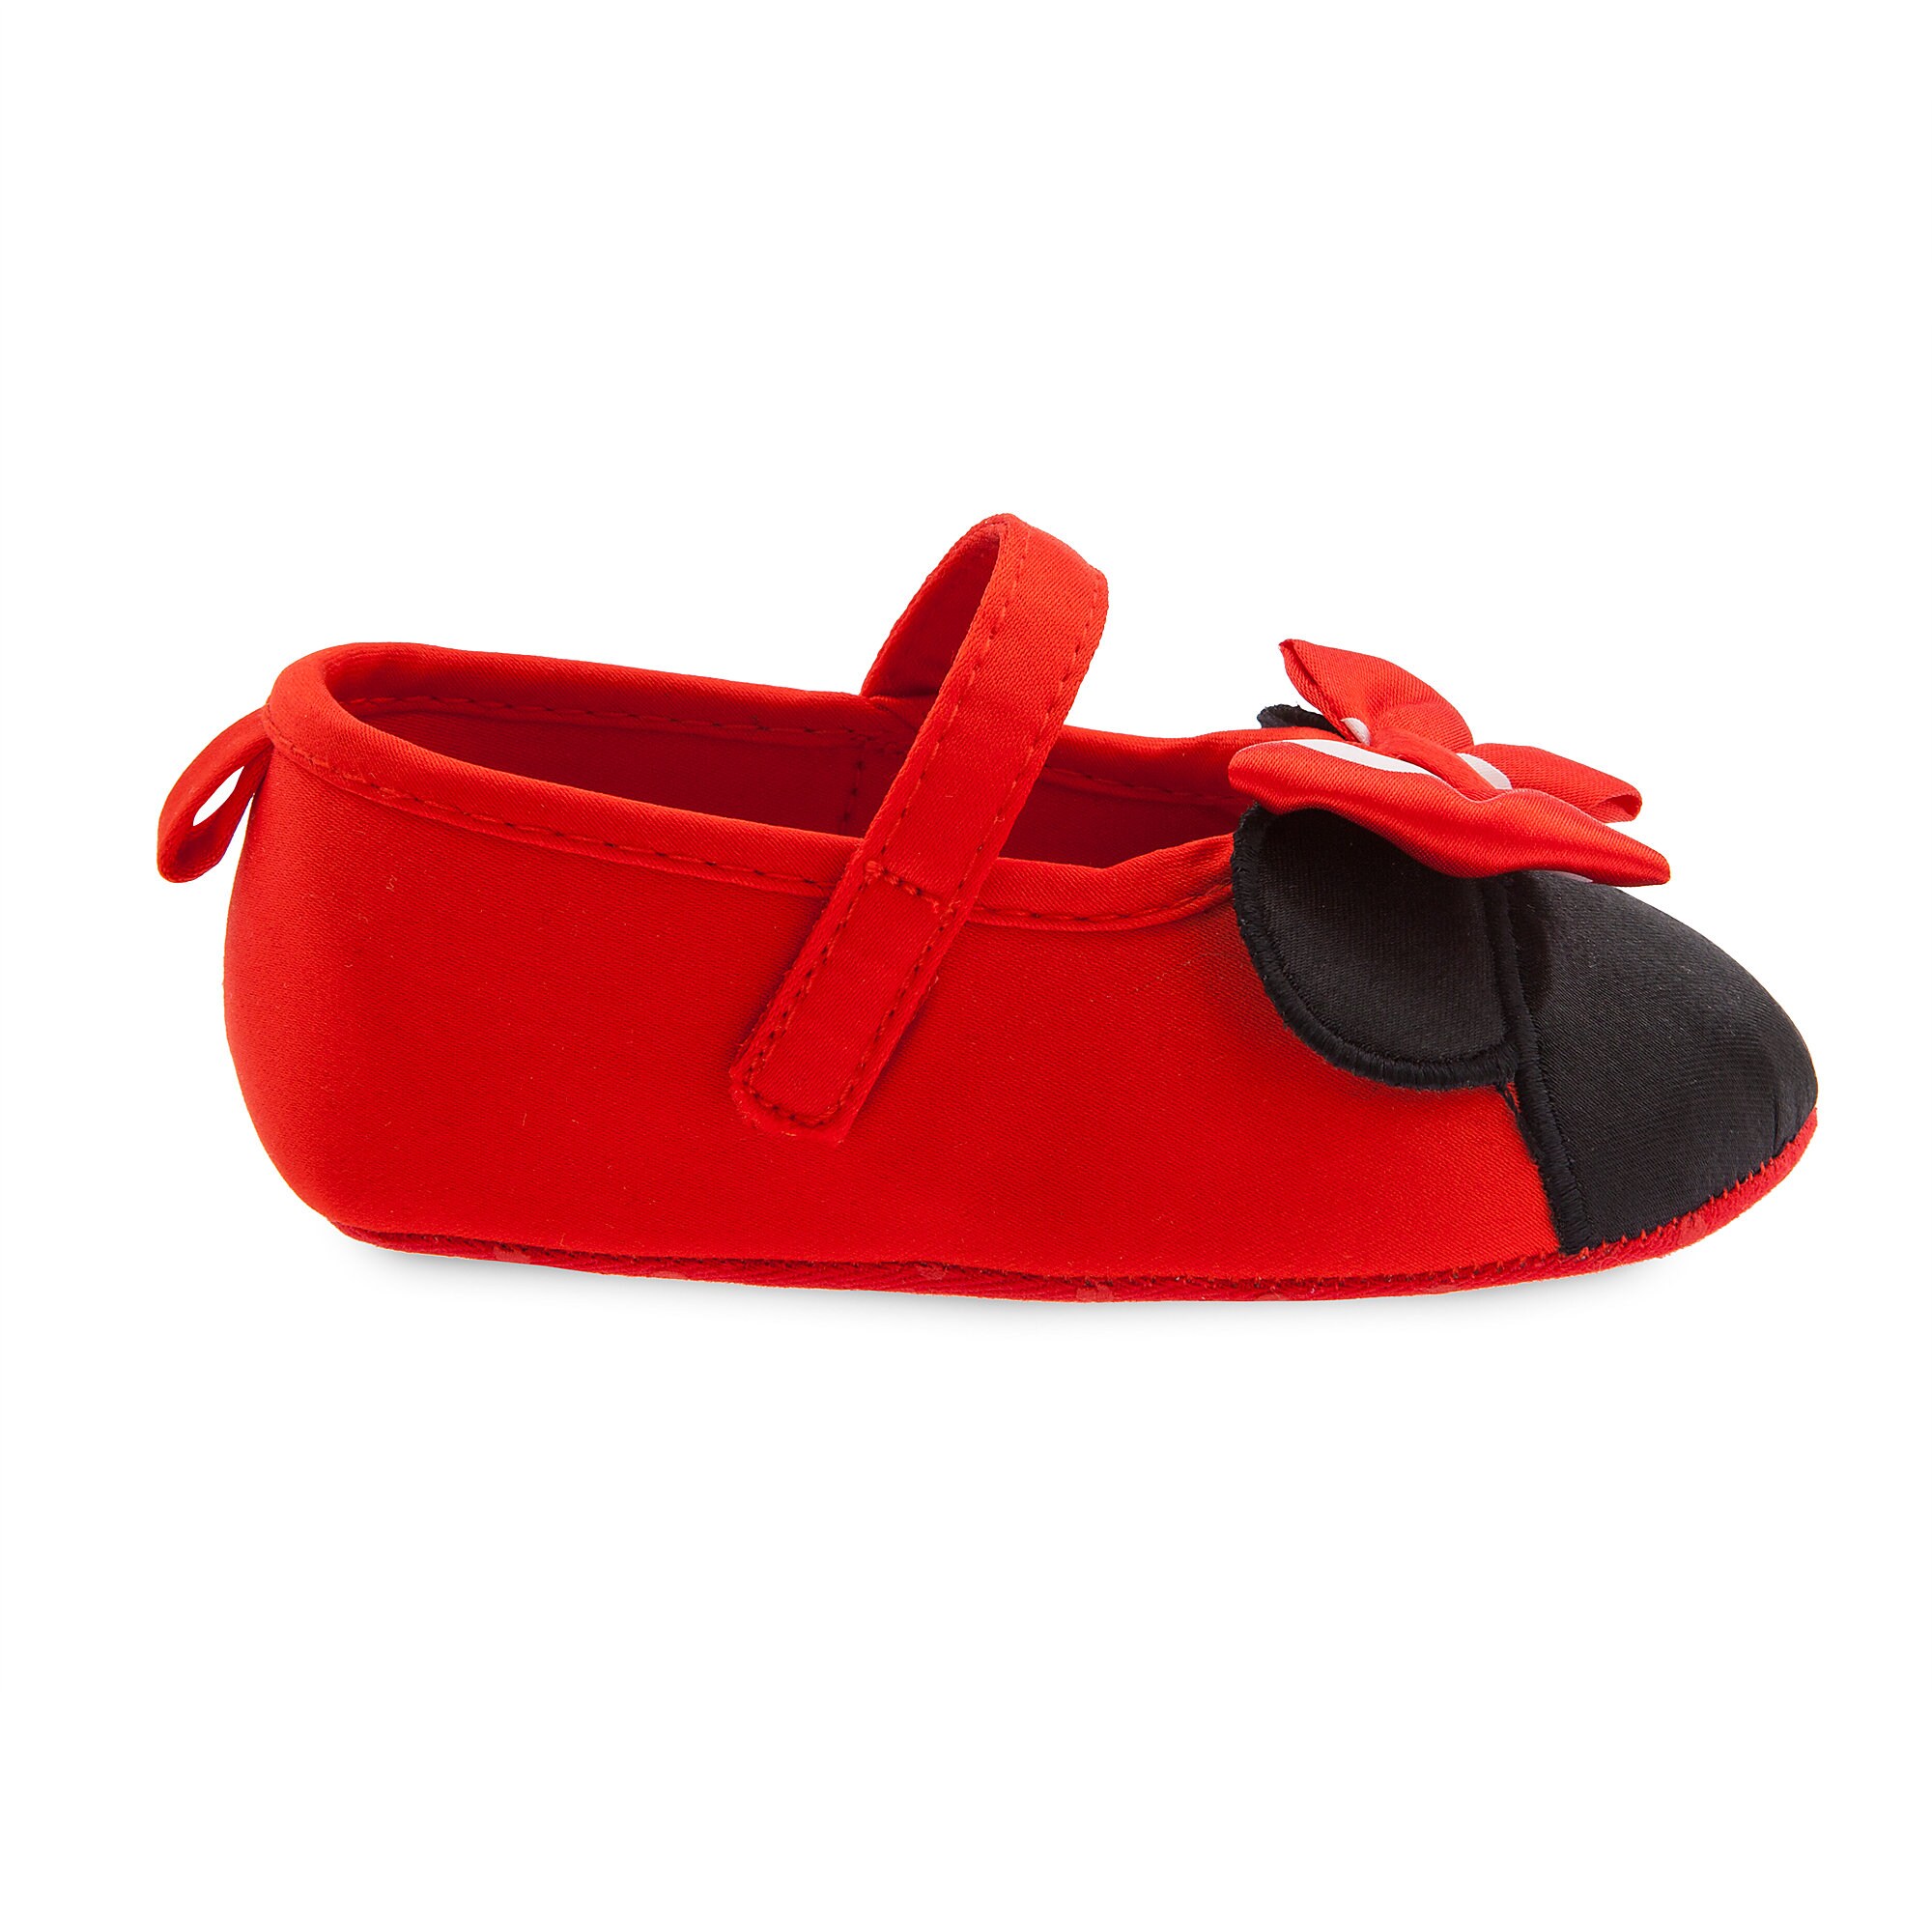 Minnie Mouse Costume Shoes for Baby - Red